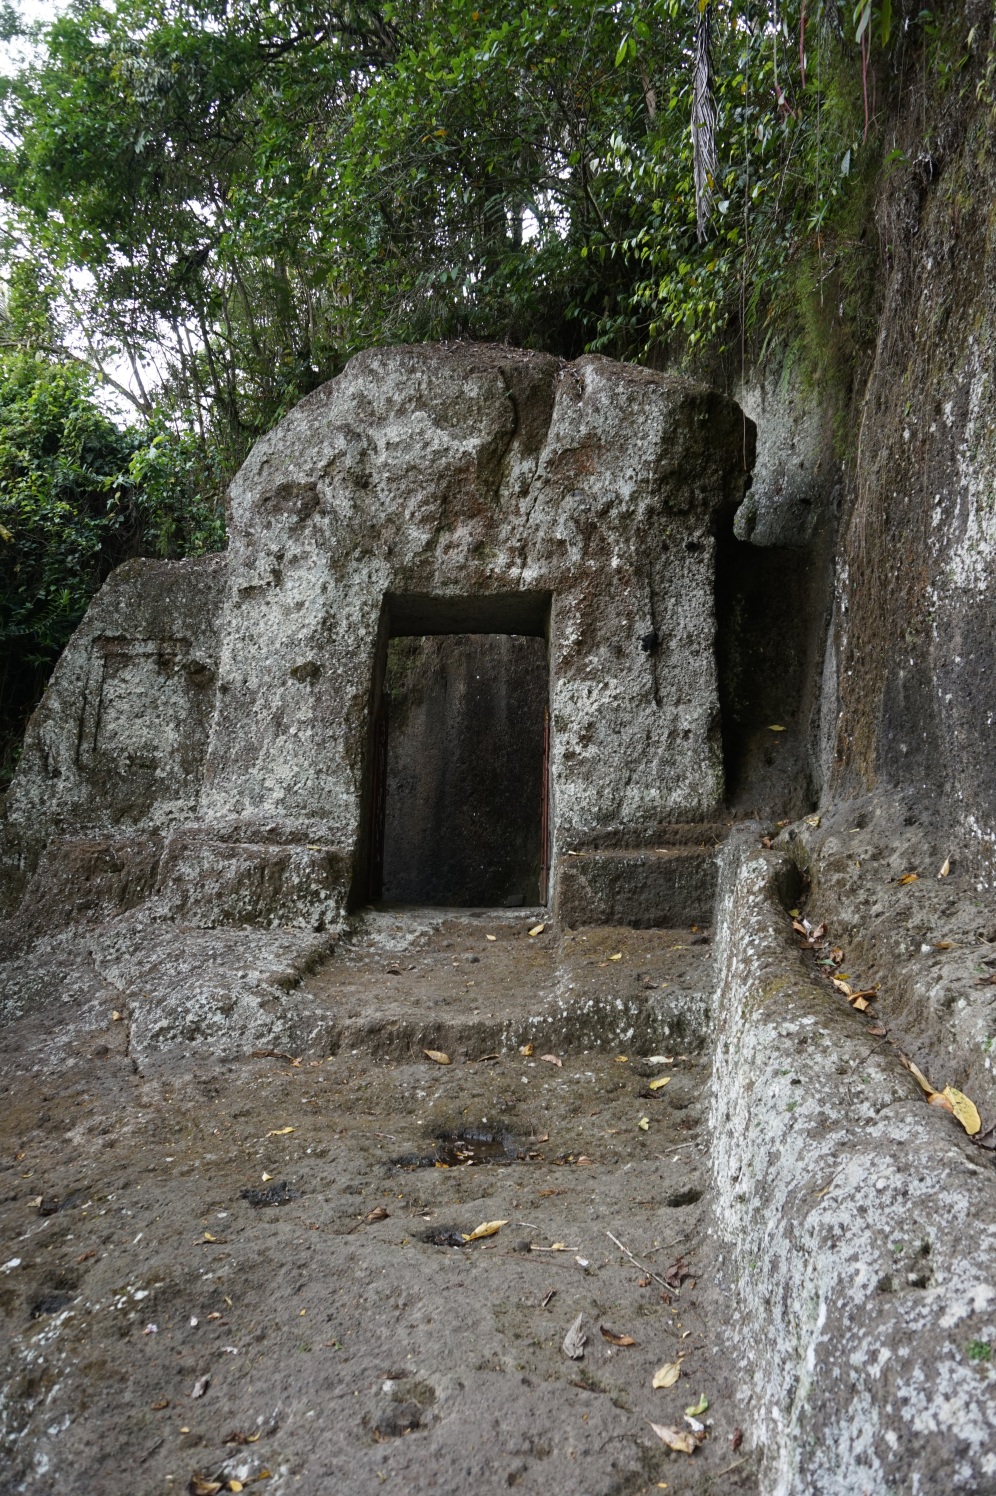 Entrance to the oldest part of the temple